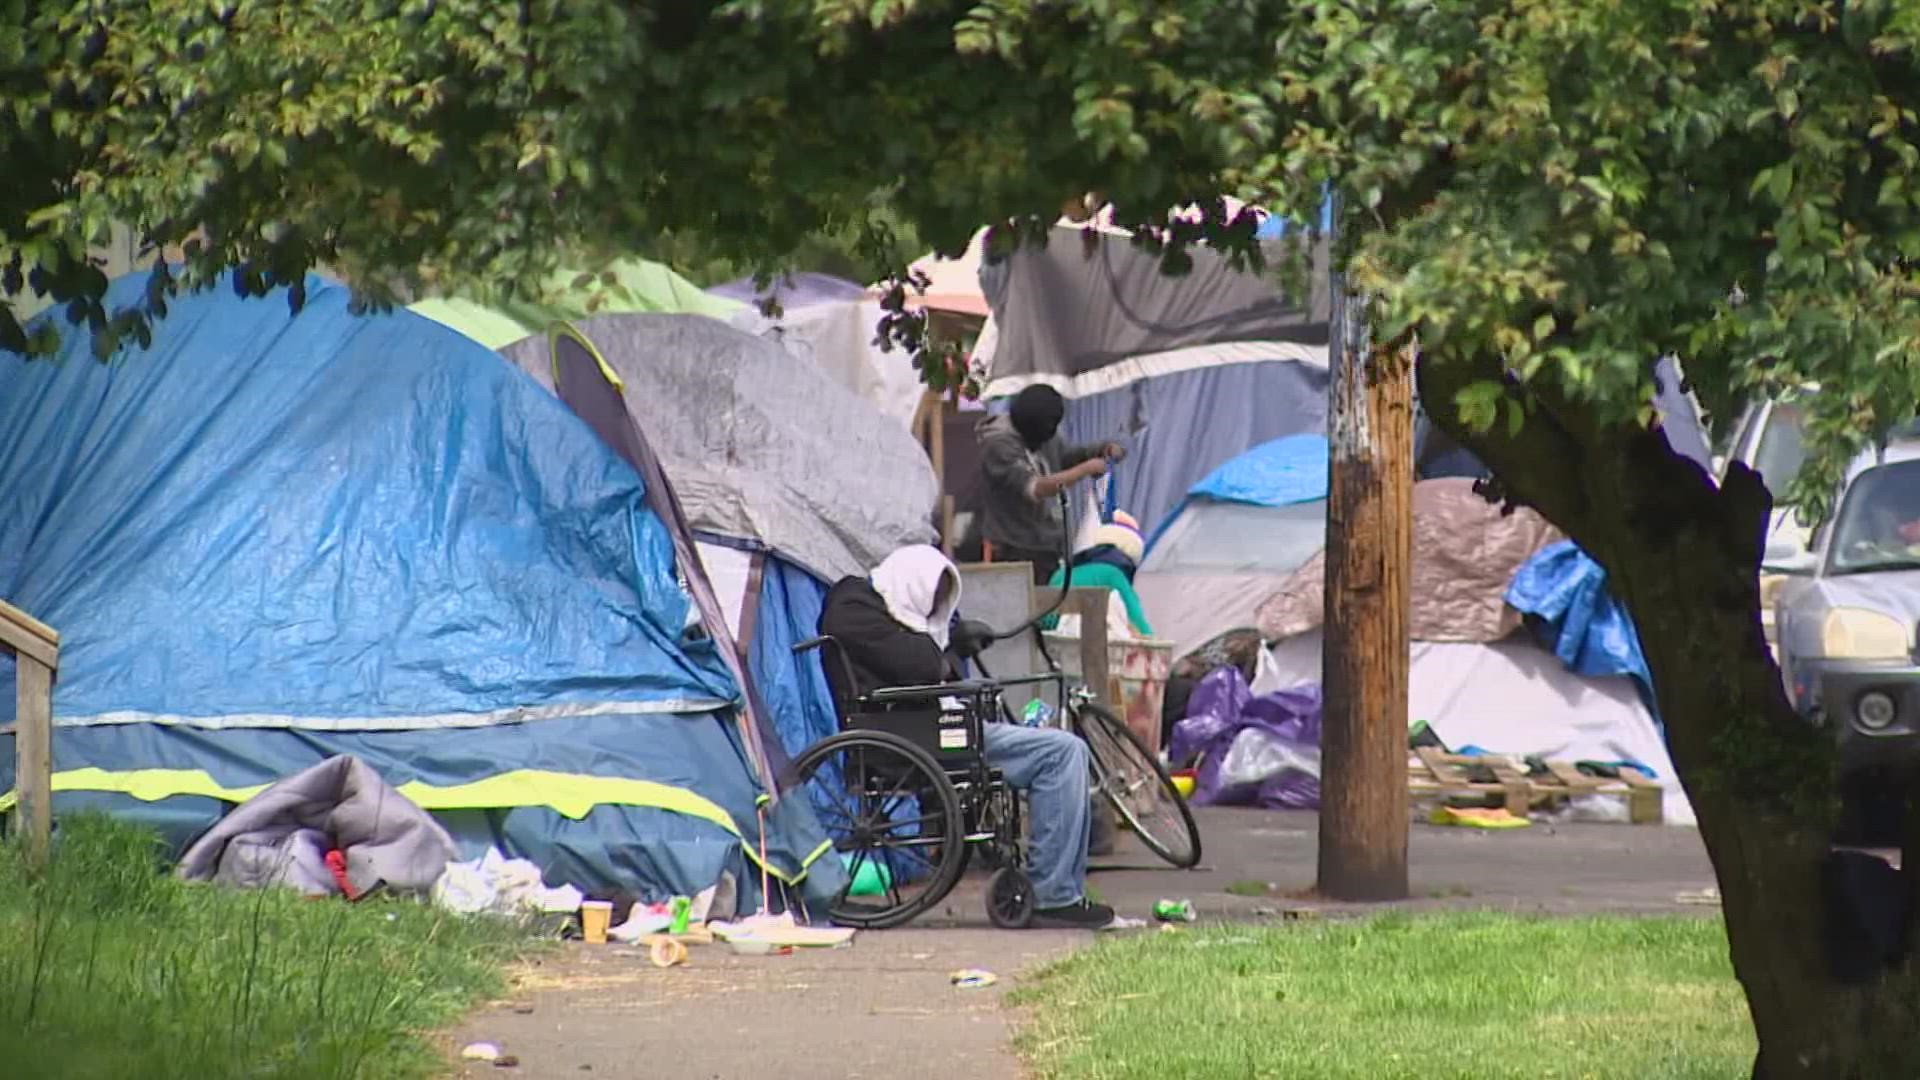 Tacoma has seen a significant increase of encampment removals since 2021, but some say the approach may be counterproductive to dealing with homelessness.